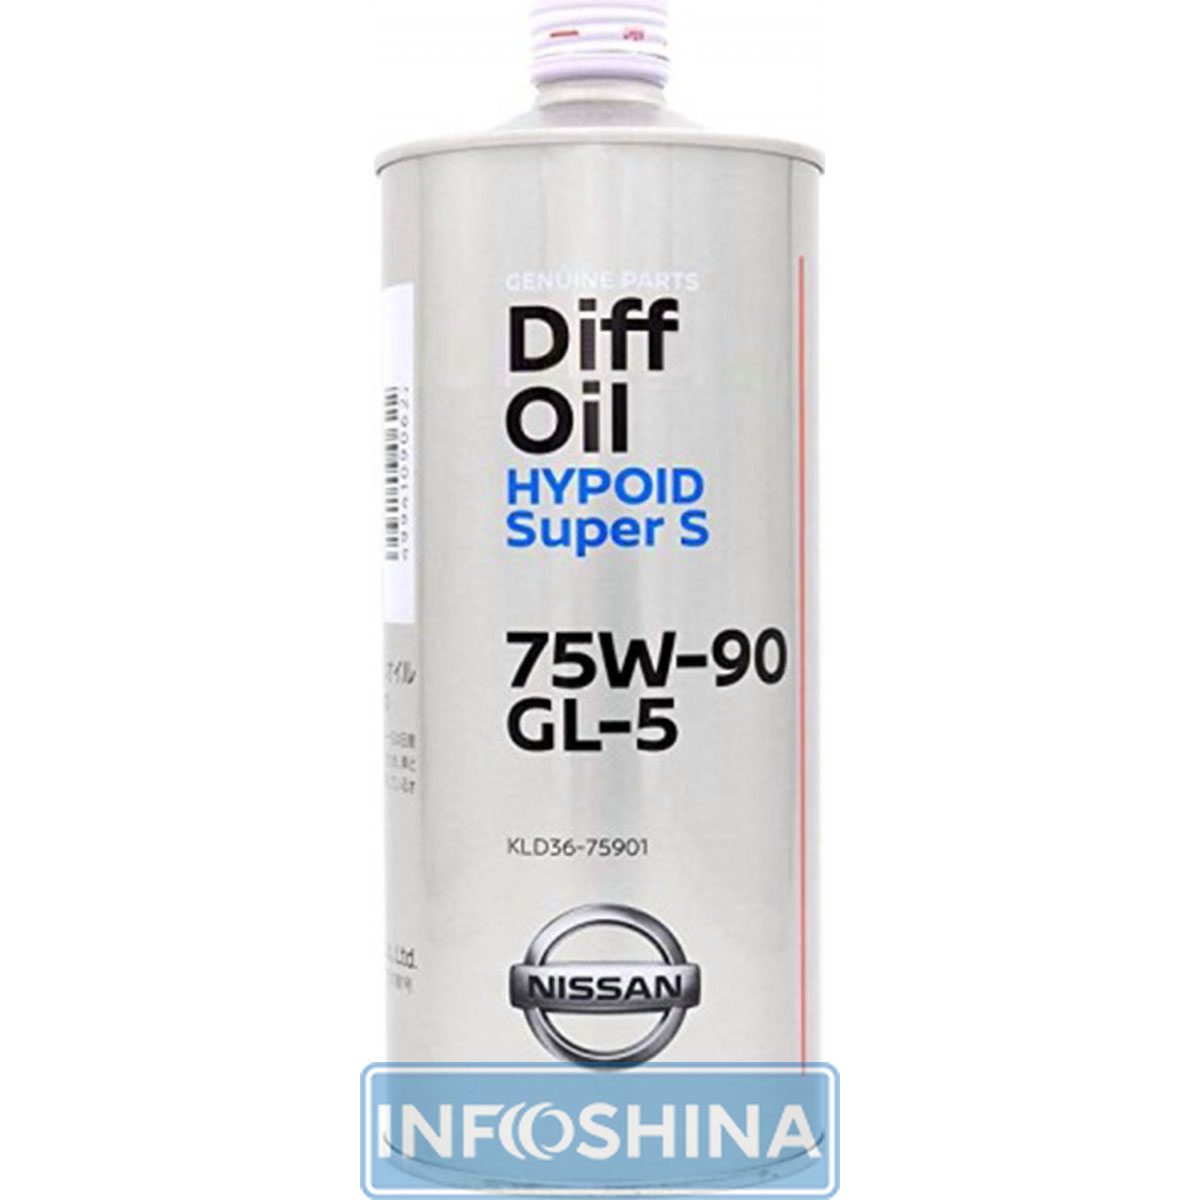 Nissan Diff Oil Hypoid Super S 75W-90 GL-5